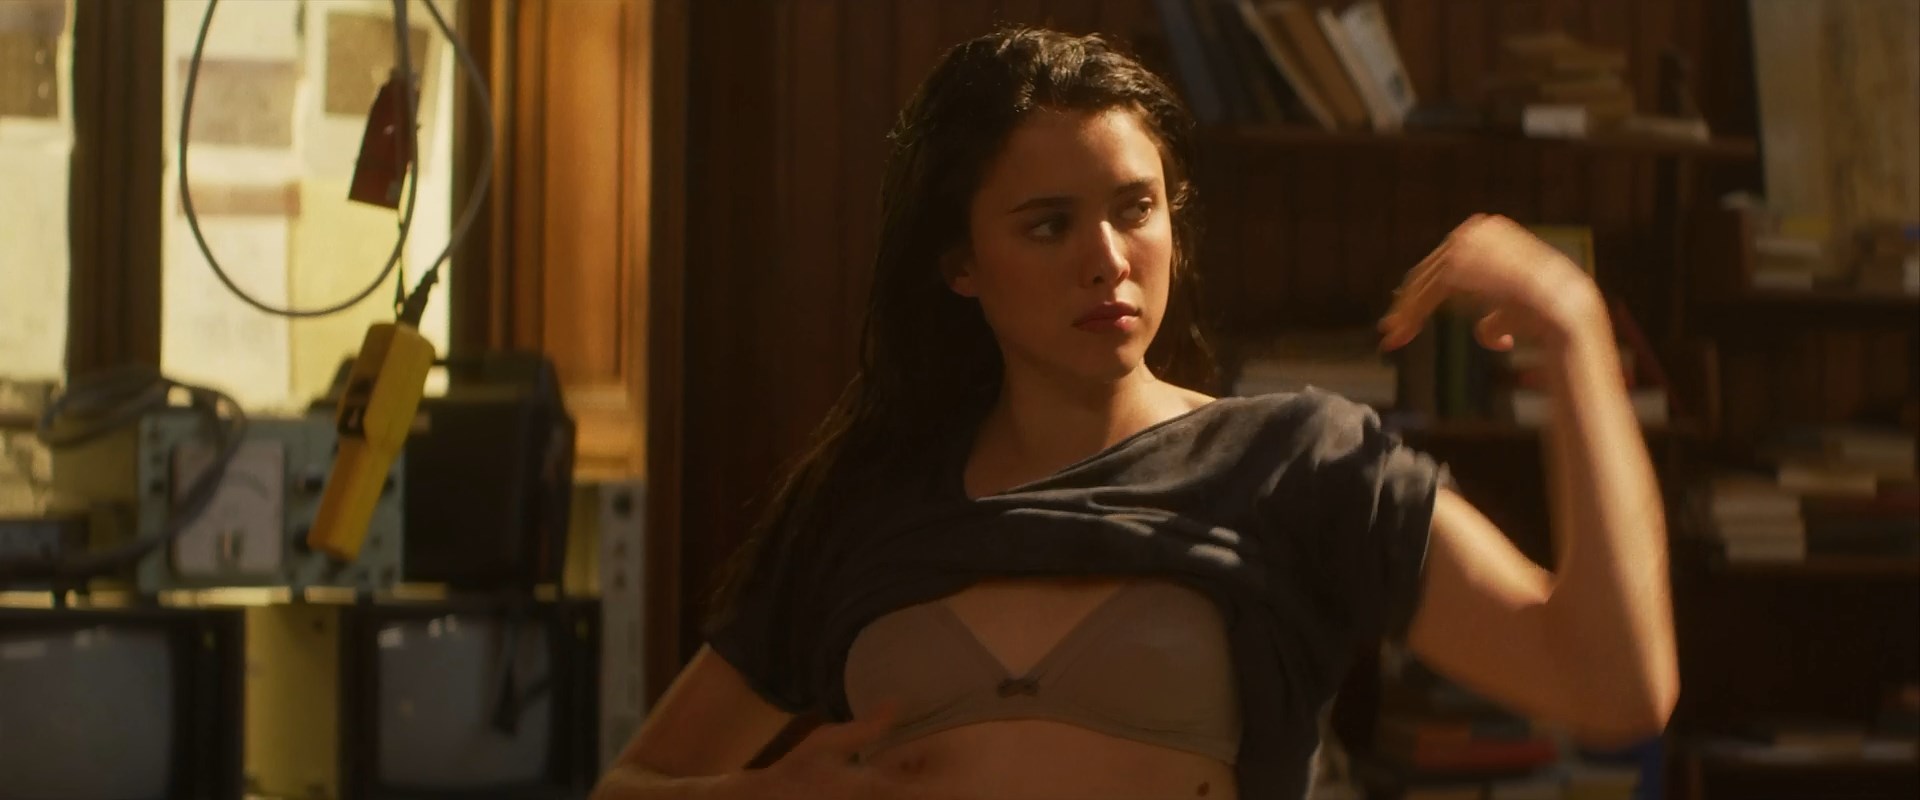 Rainey qualley naked